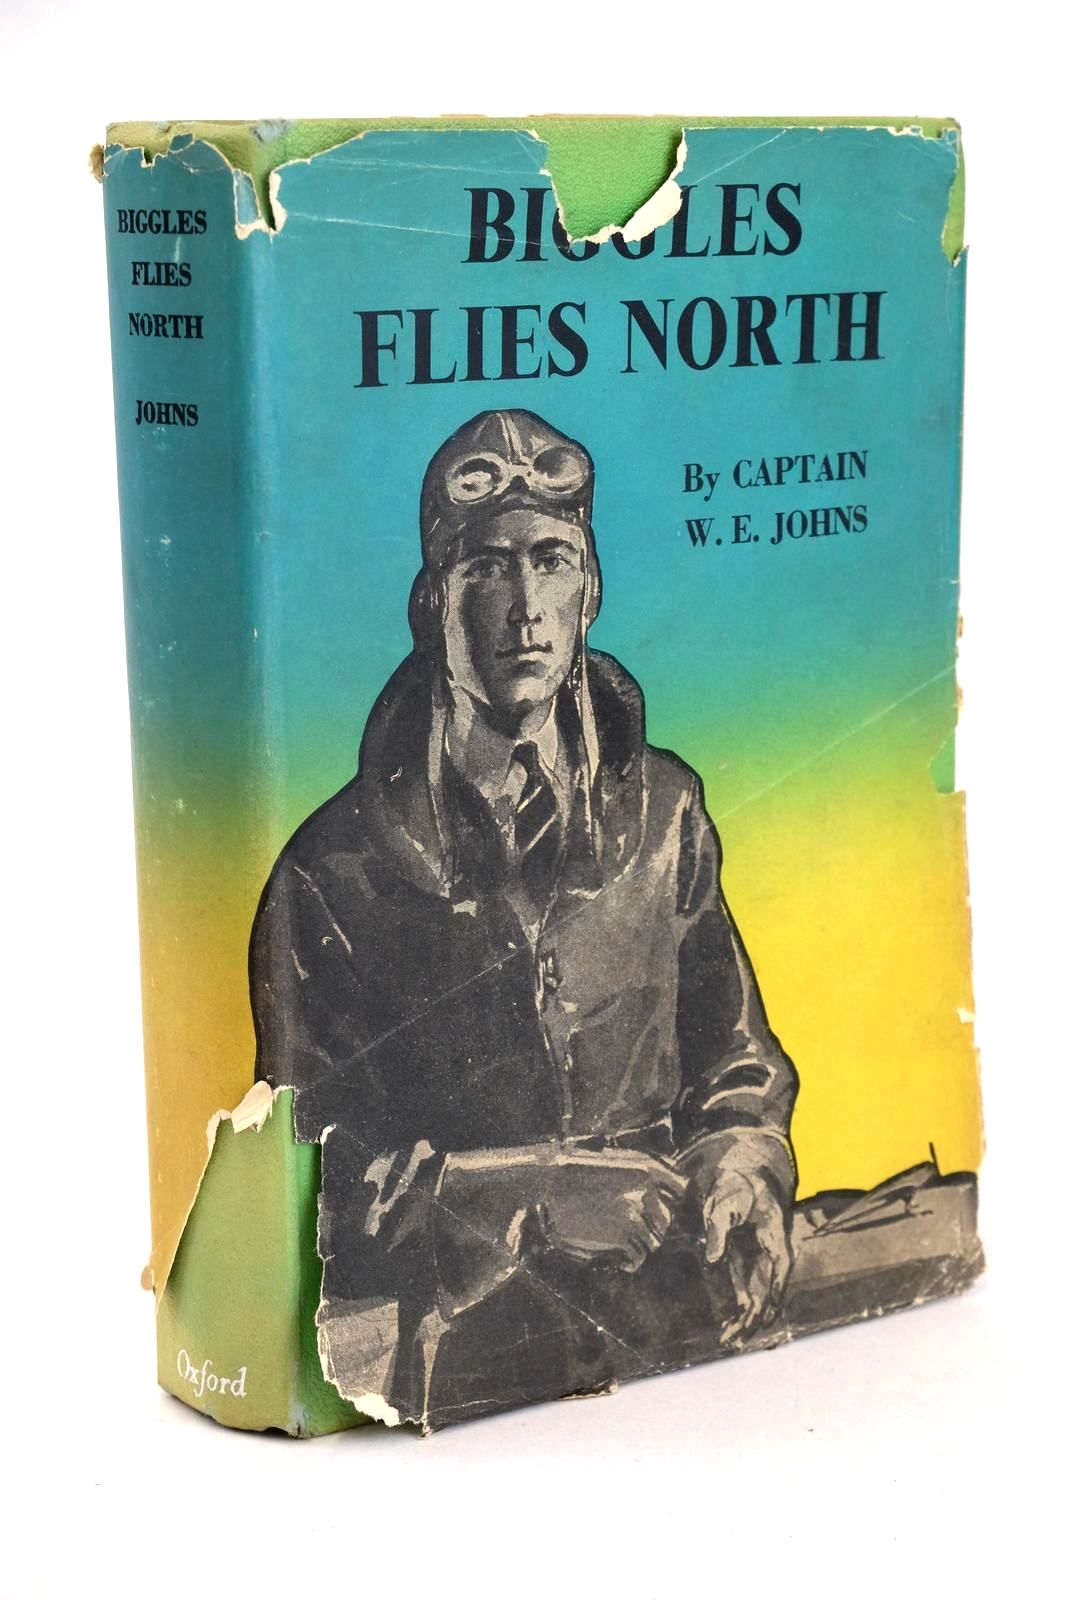 Photo of BIGGLES FLIES NORTH written by Johns, W.E. illustrated by Narraway, William published by Oxford University Press, Geoffrey Cumberlege (STOCK CODE: 1326427)  for sale by Stella & Rose's Books